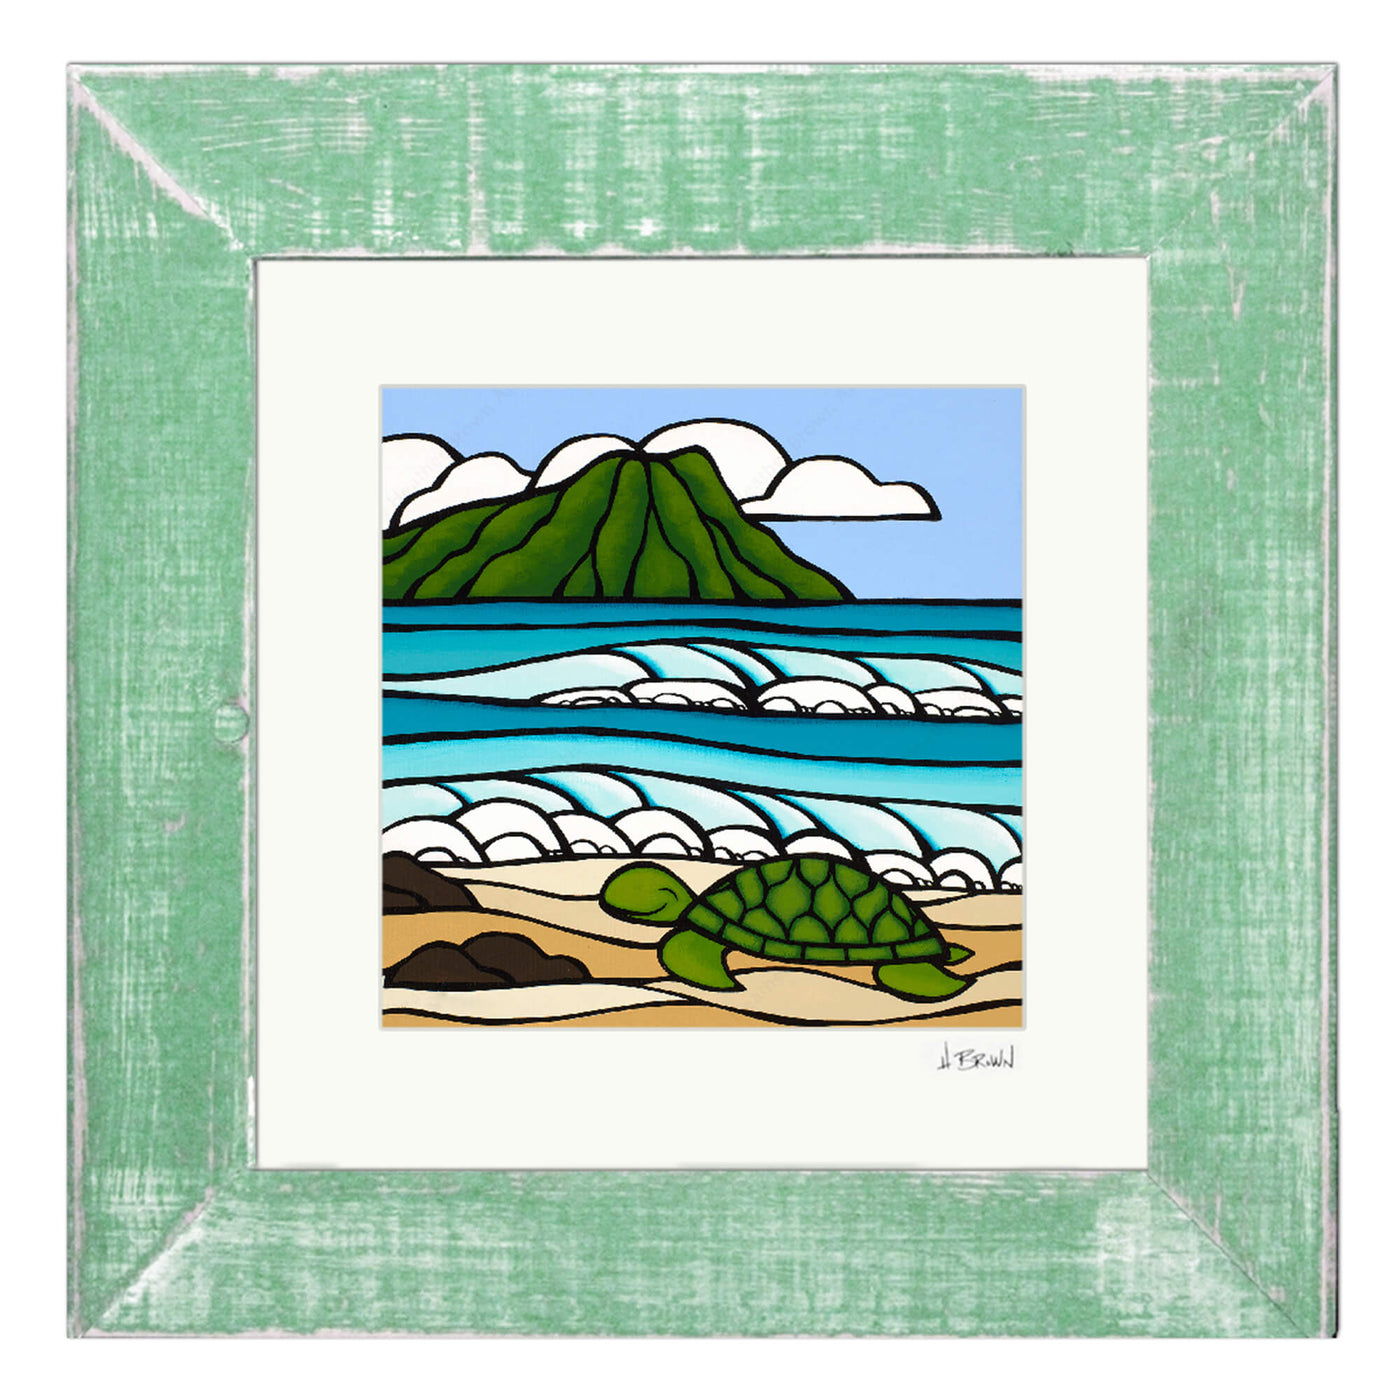 A matted art print in classic green frame featuring a smiling turtle with some rolling waves and the famous Diamond Head by Hawaii surf artist Heather brown